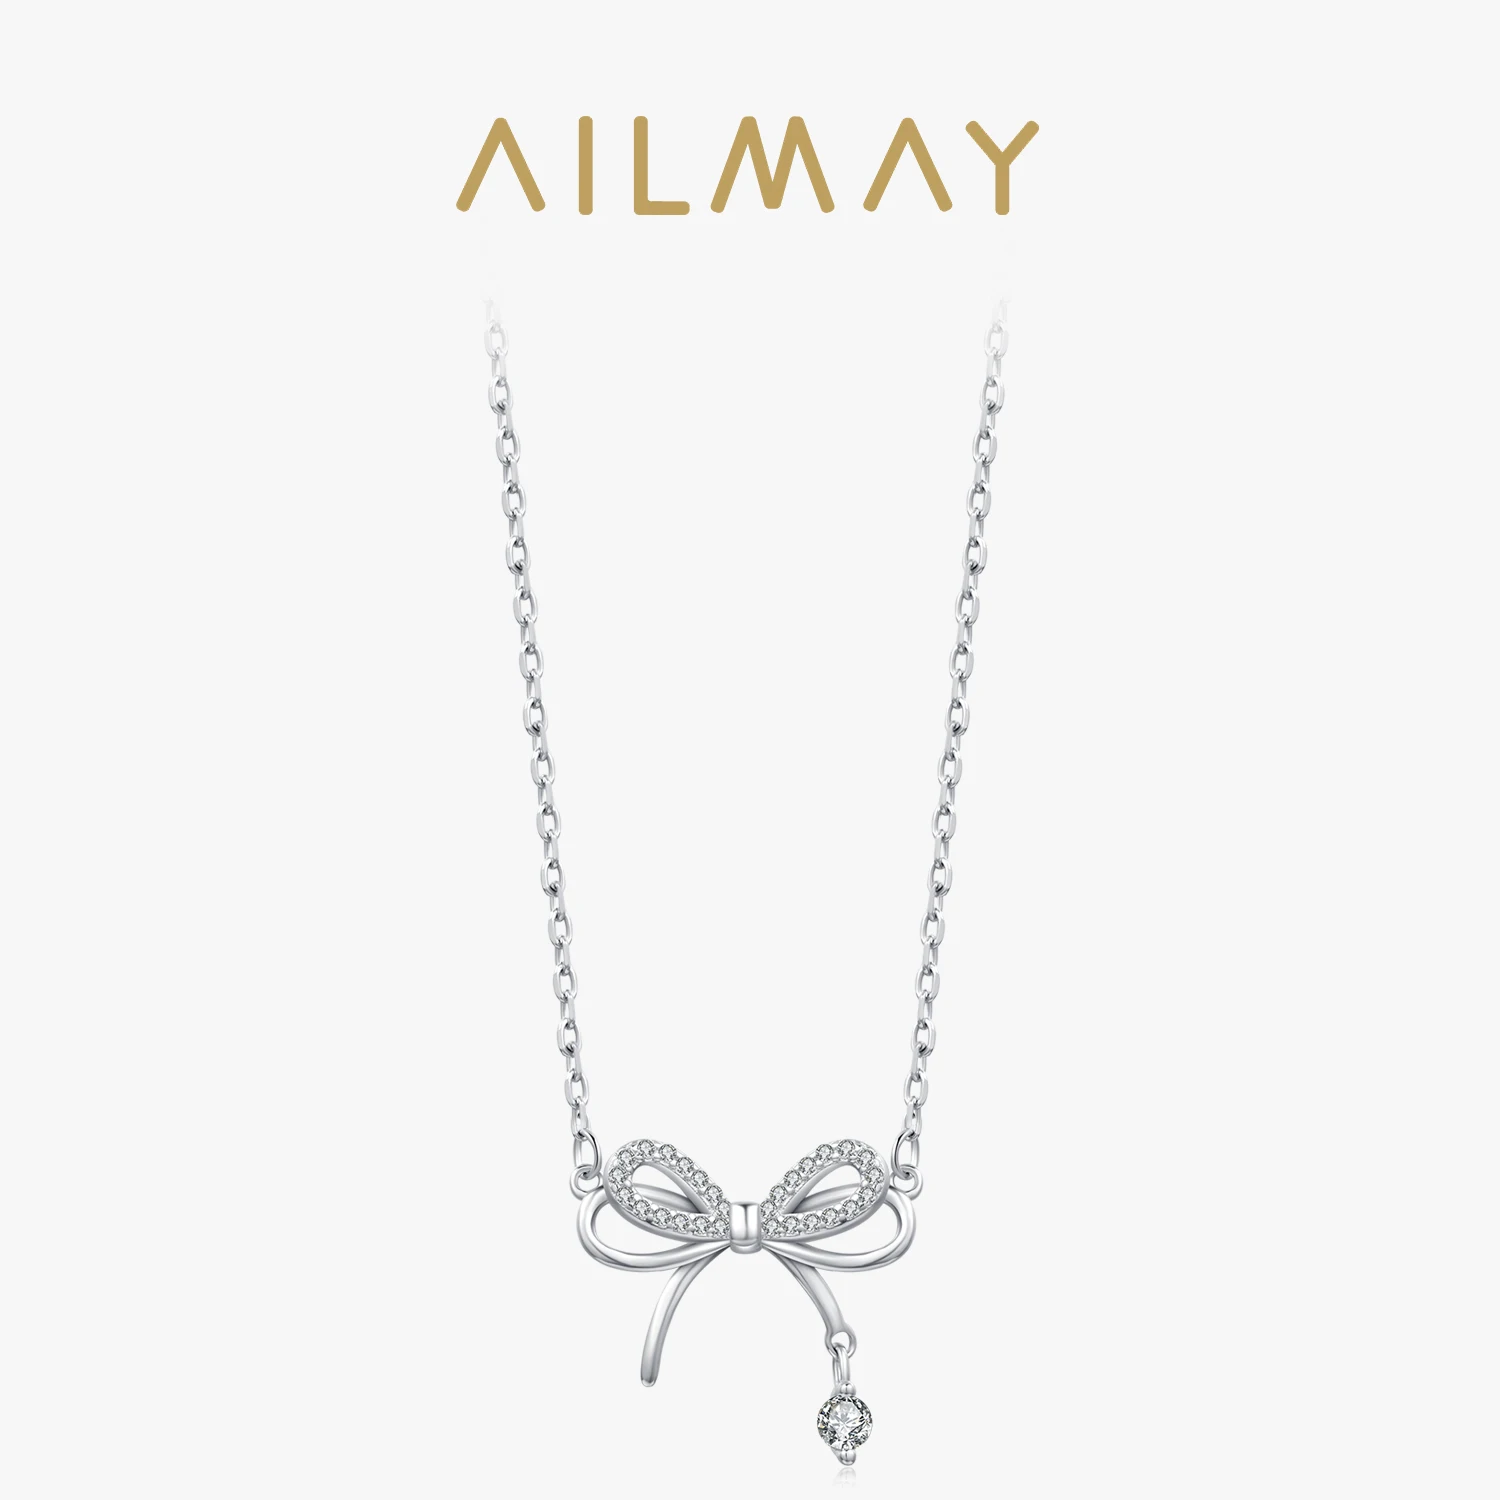 

Ailmay Authentic 925 Sterling Silver Fashion Elegant Shiny CZ Bowknot Pendant Necklace For Women Romantic Wedding Jewelry Gifts